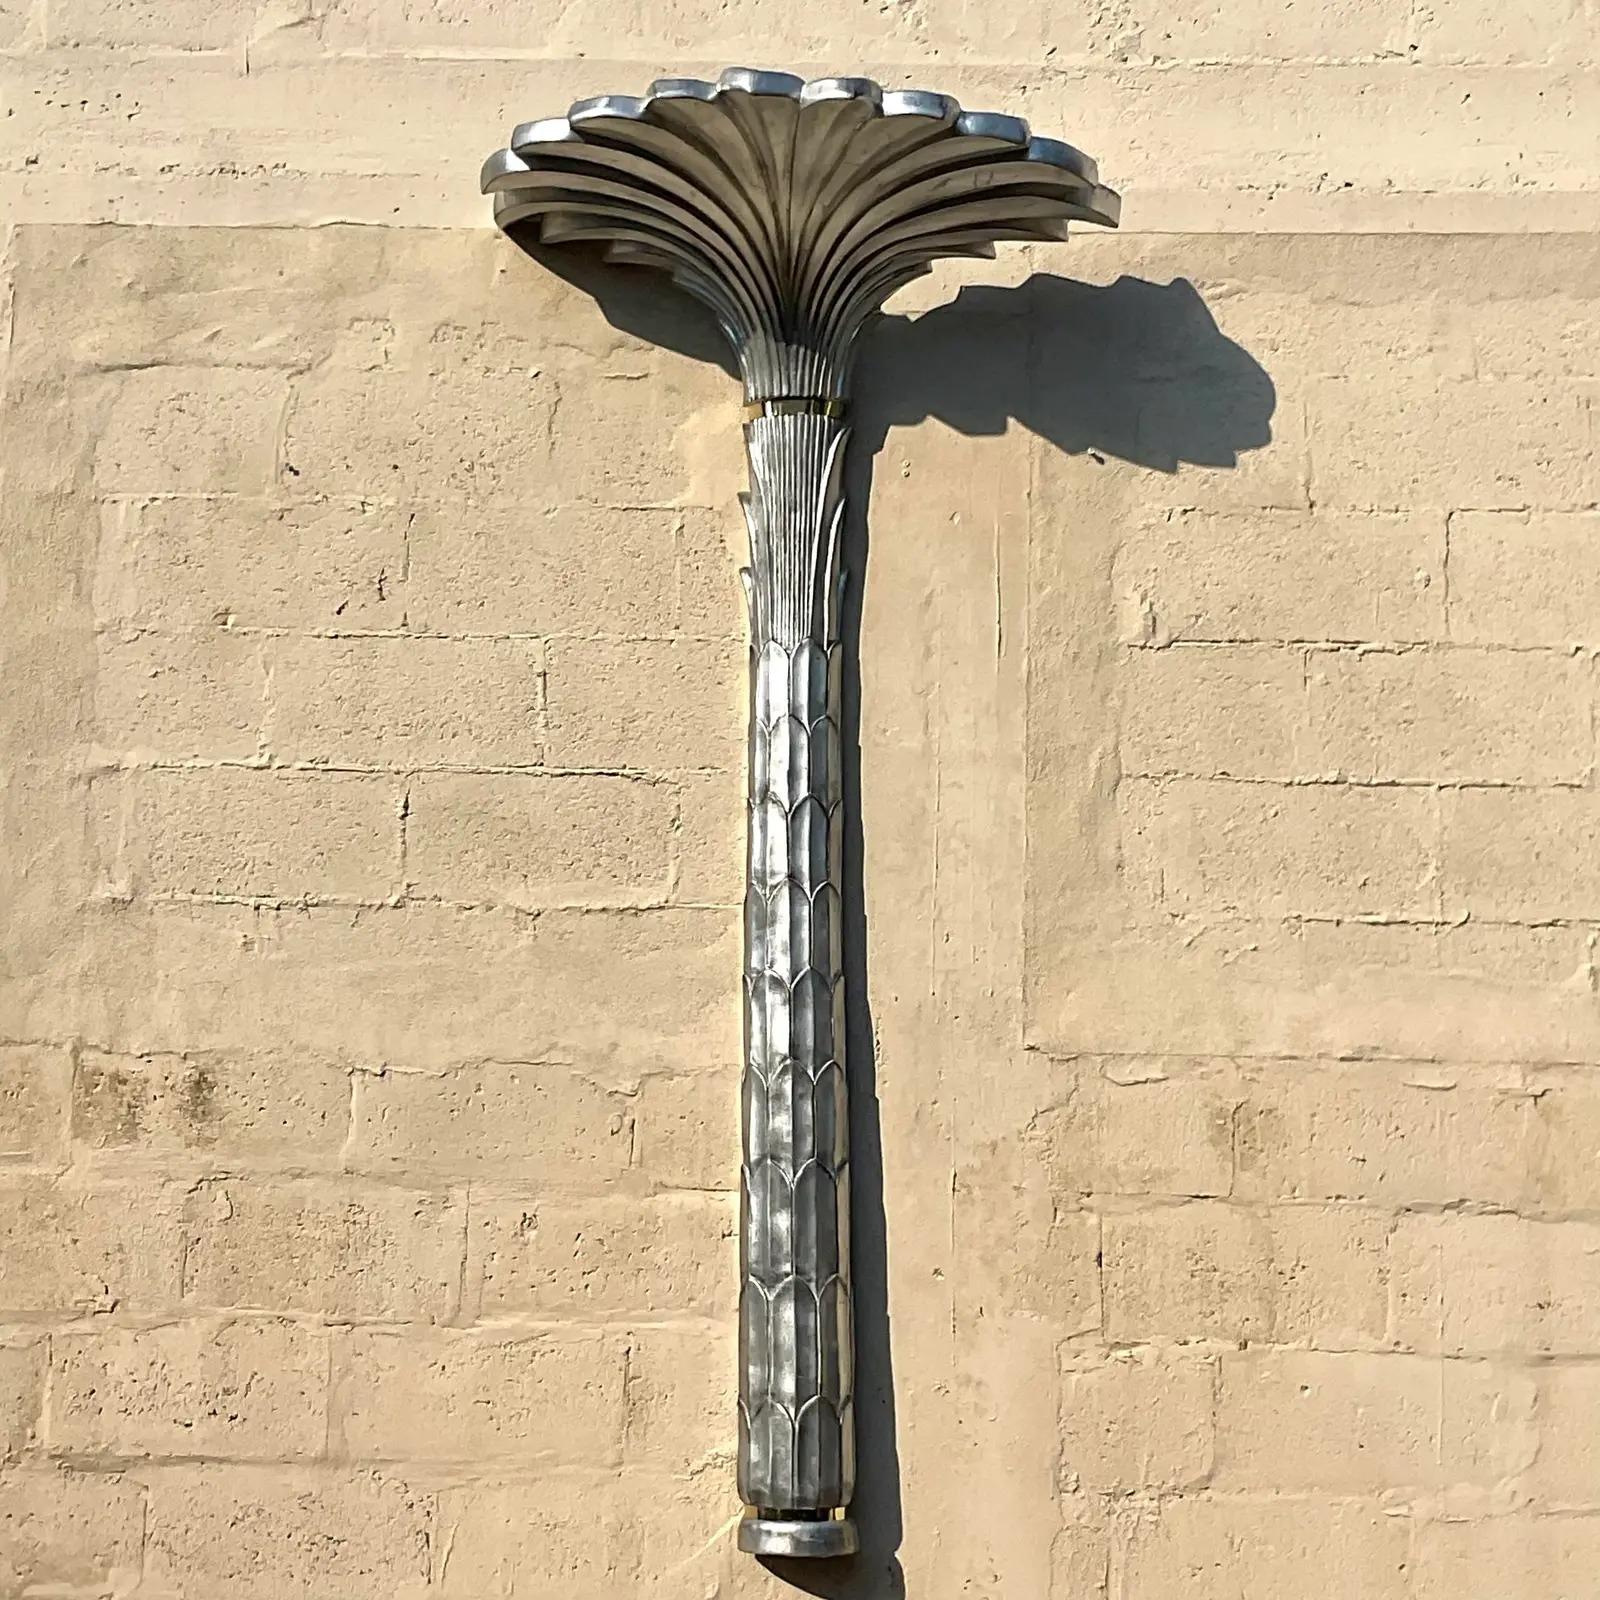 A spectacular vintage Regency wall lamp. A chic silver leaf life size palm tree with brass bands. Perfect as is or change to bright white for a classic Dorothy Draper look. You decide! Acquired from a Palm Beach estate.